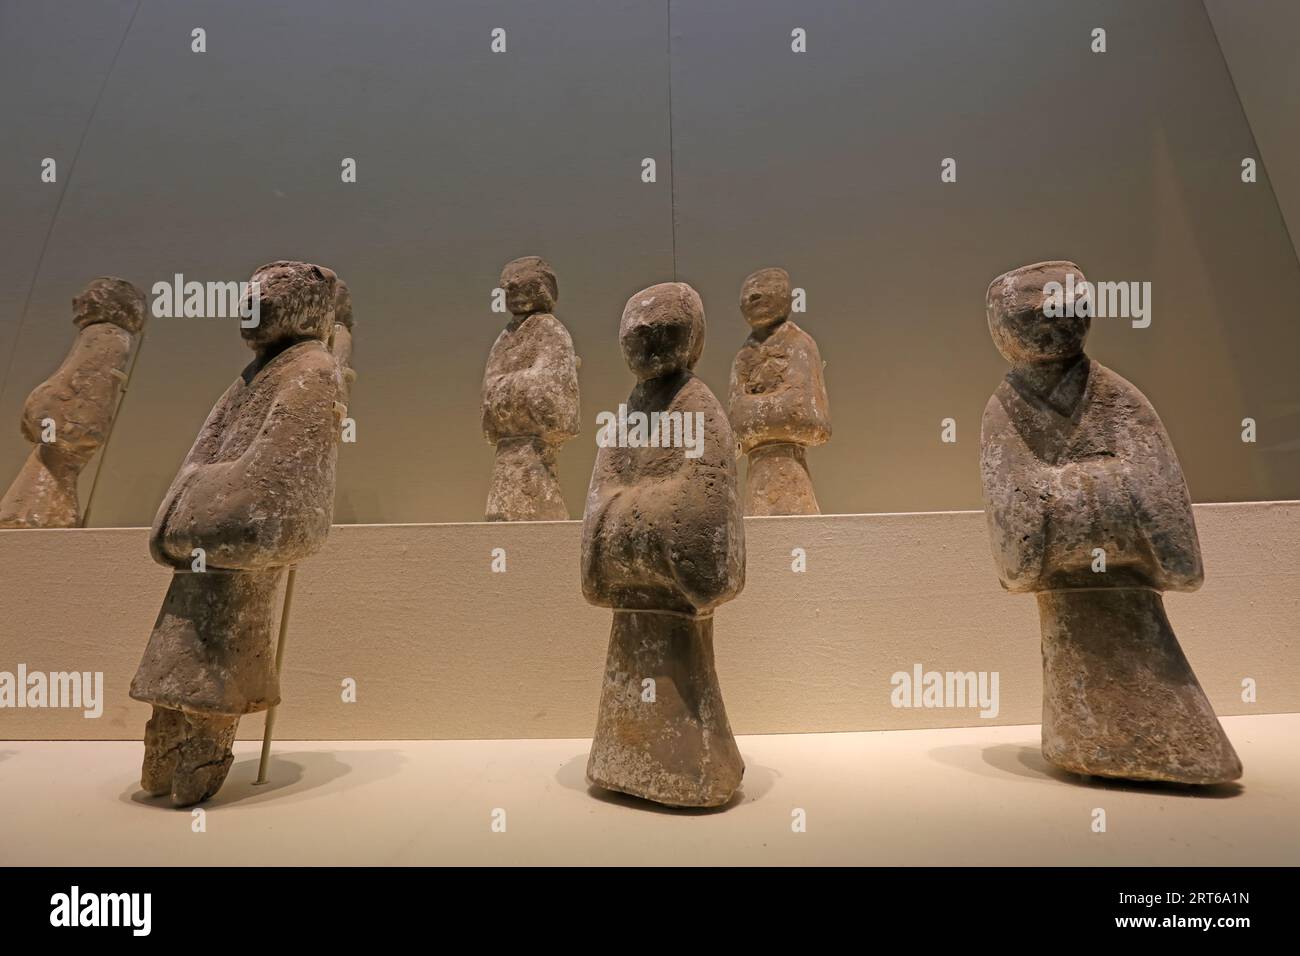 Chinese ancient ceramic figure sculpture, unearthed cultural relics Stock Photo